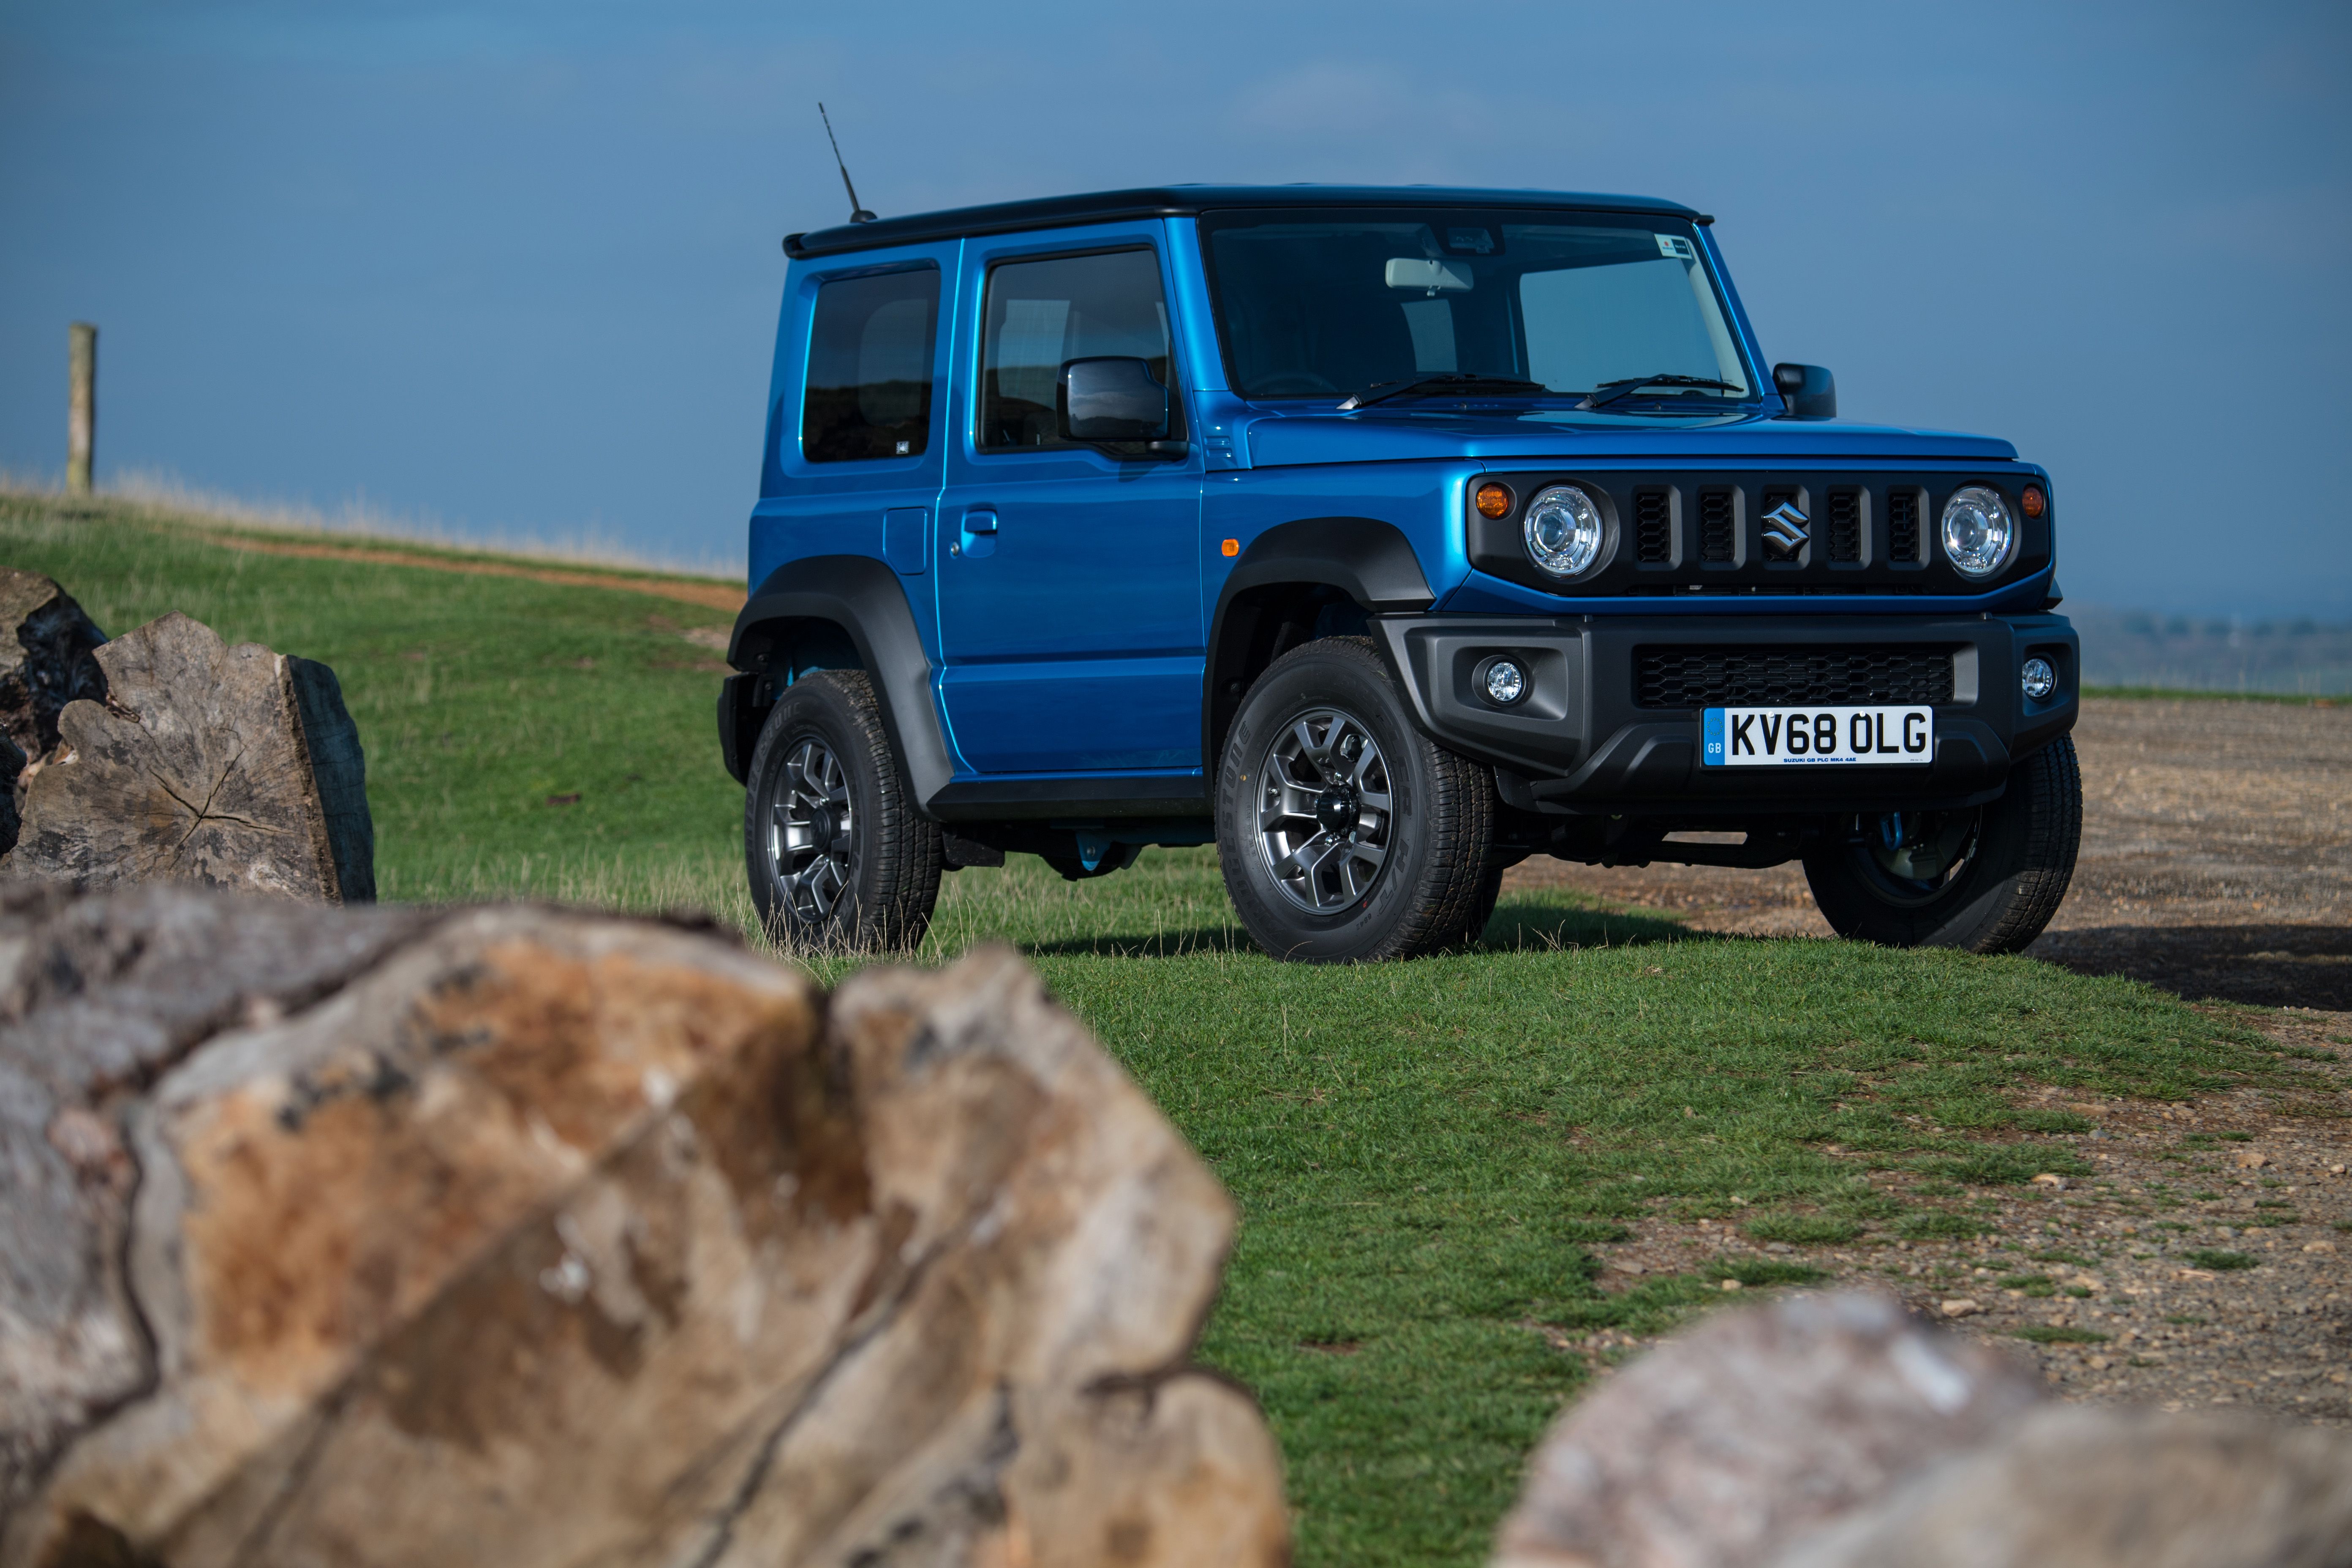 The Suzuki Jimny Is Objectively Terrible but Incredibly Charming